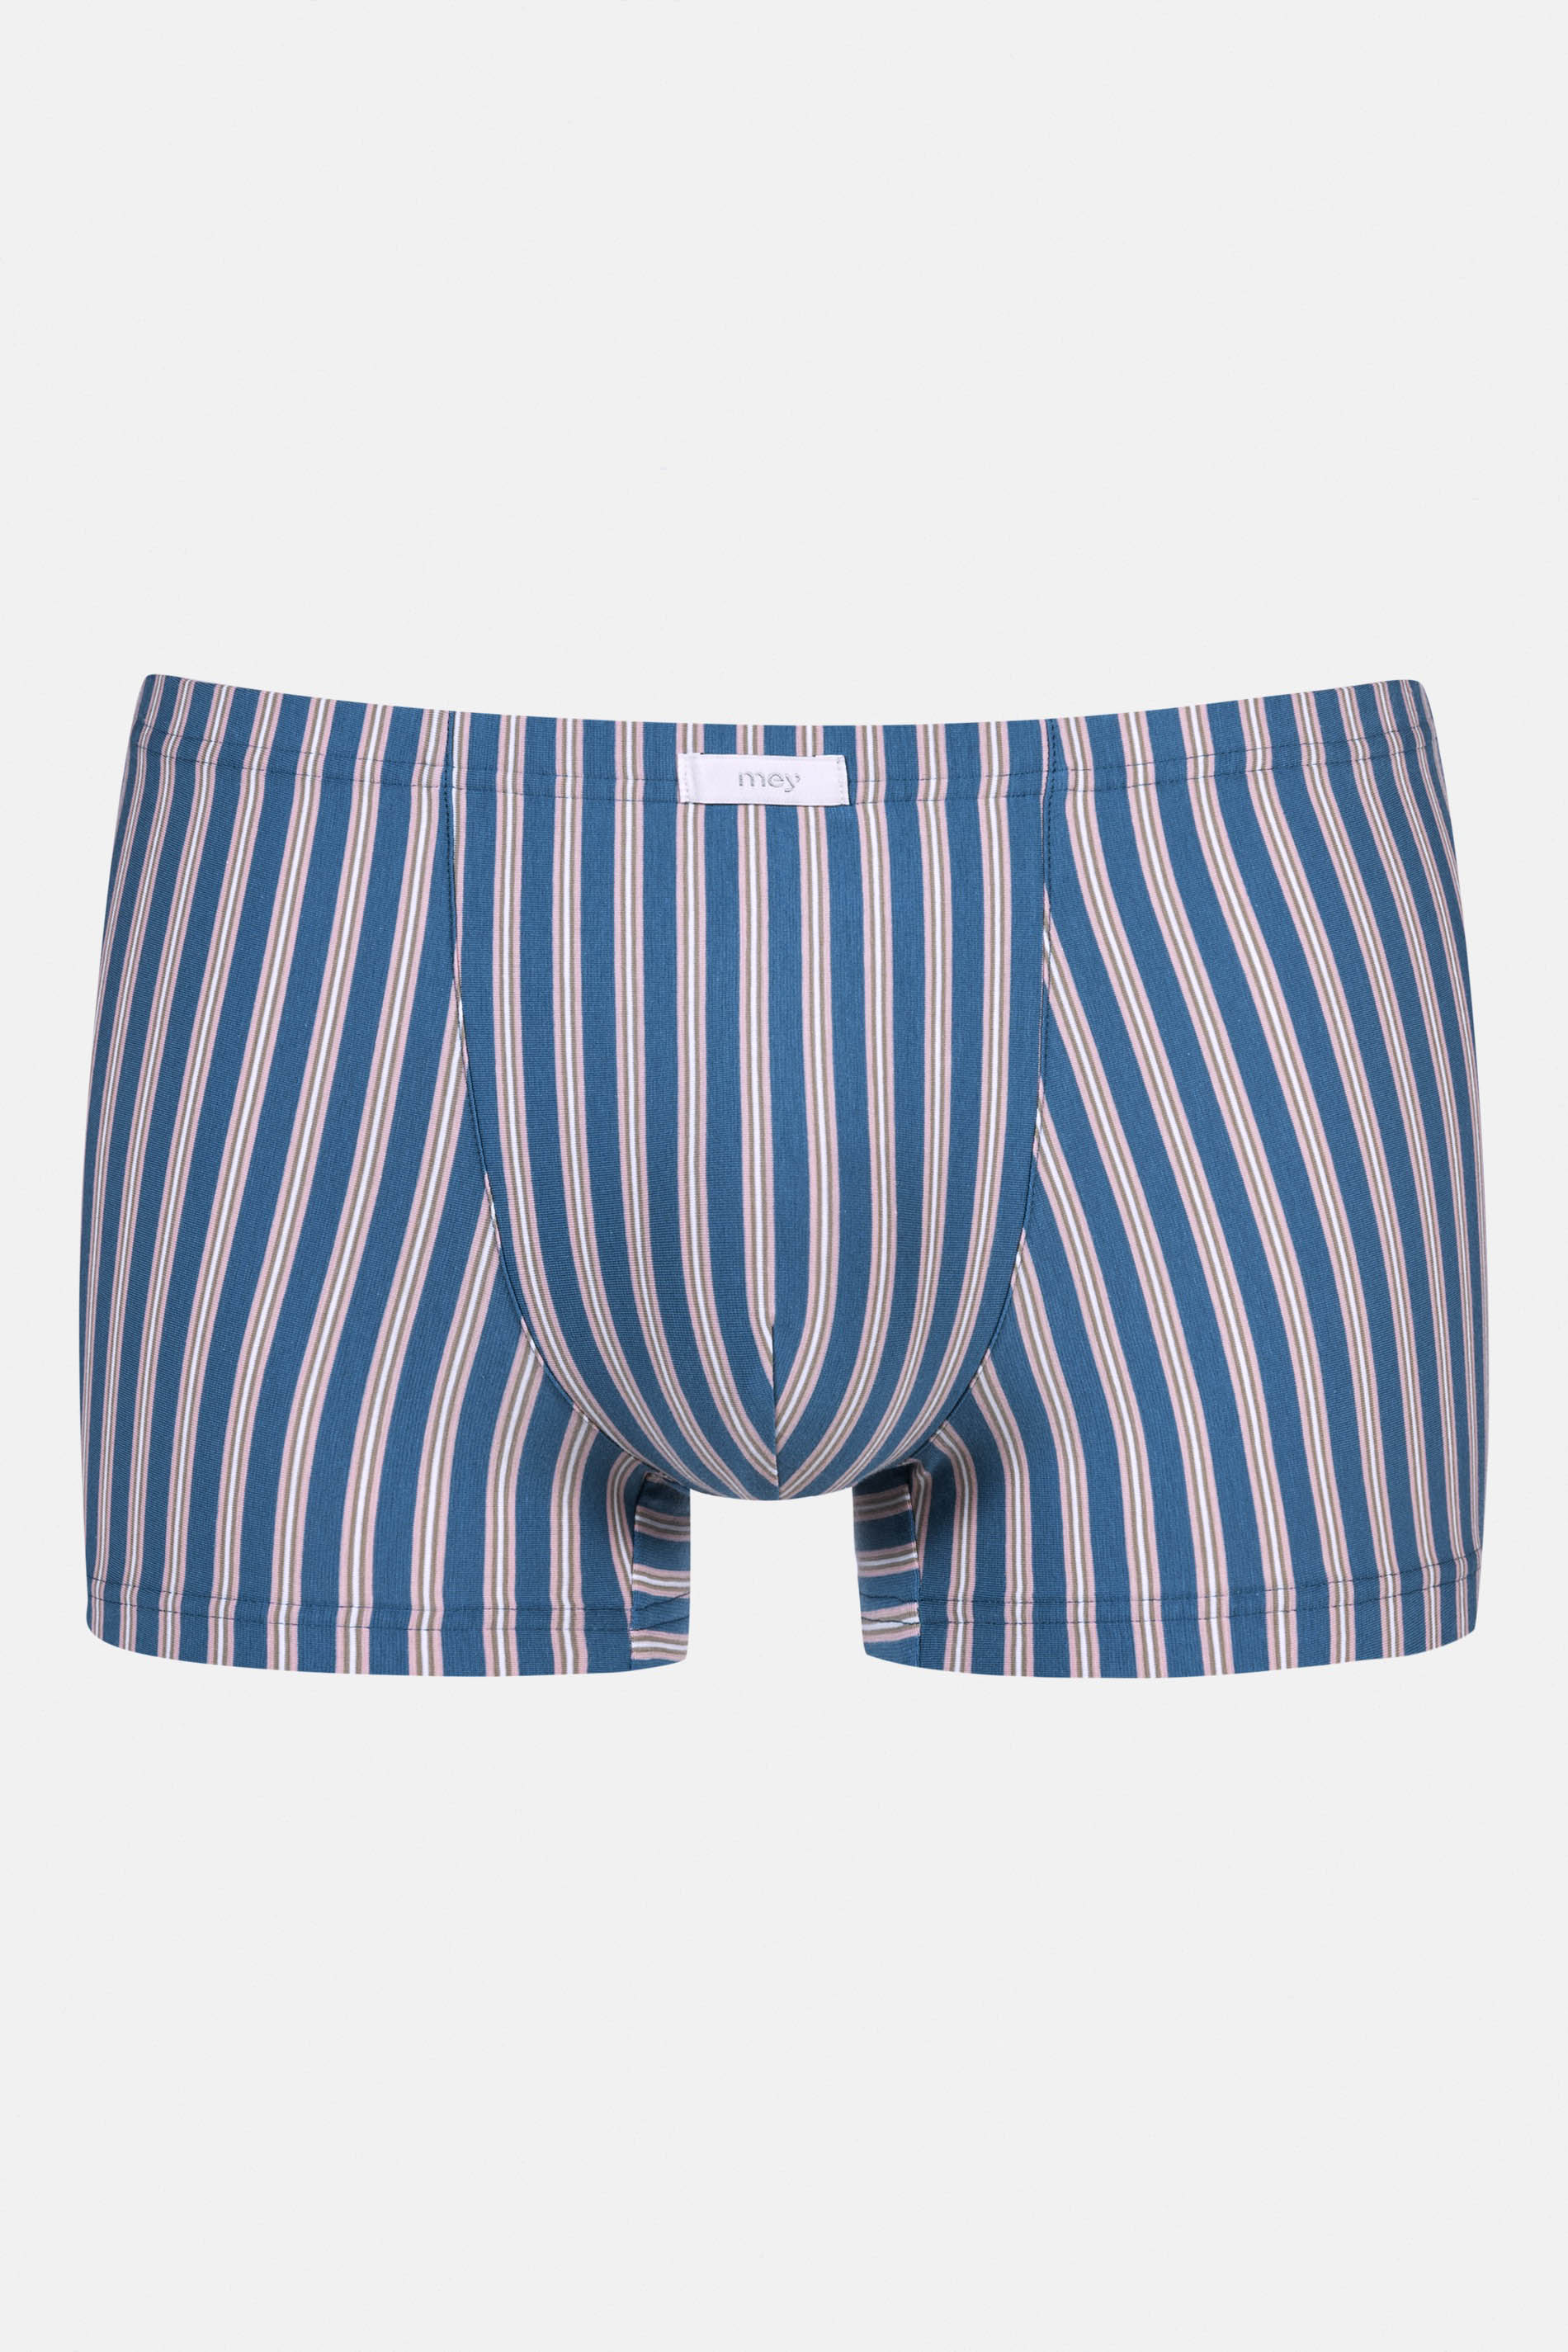 Shorty Serie Blue Stripes Uitknippen | mey®